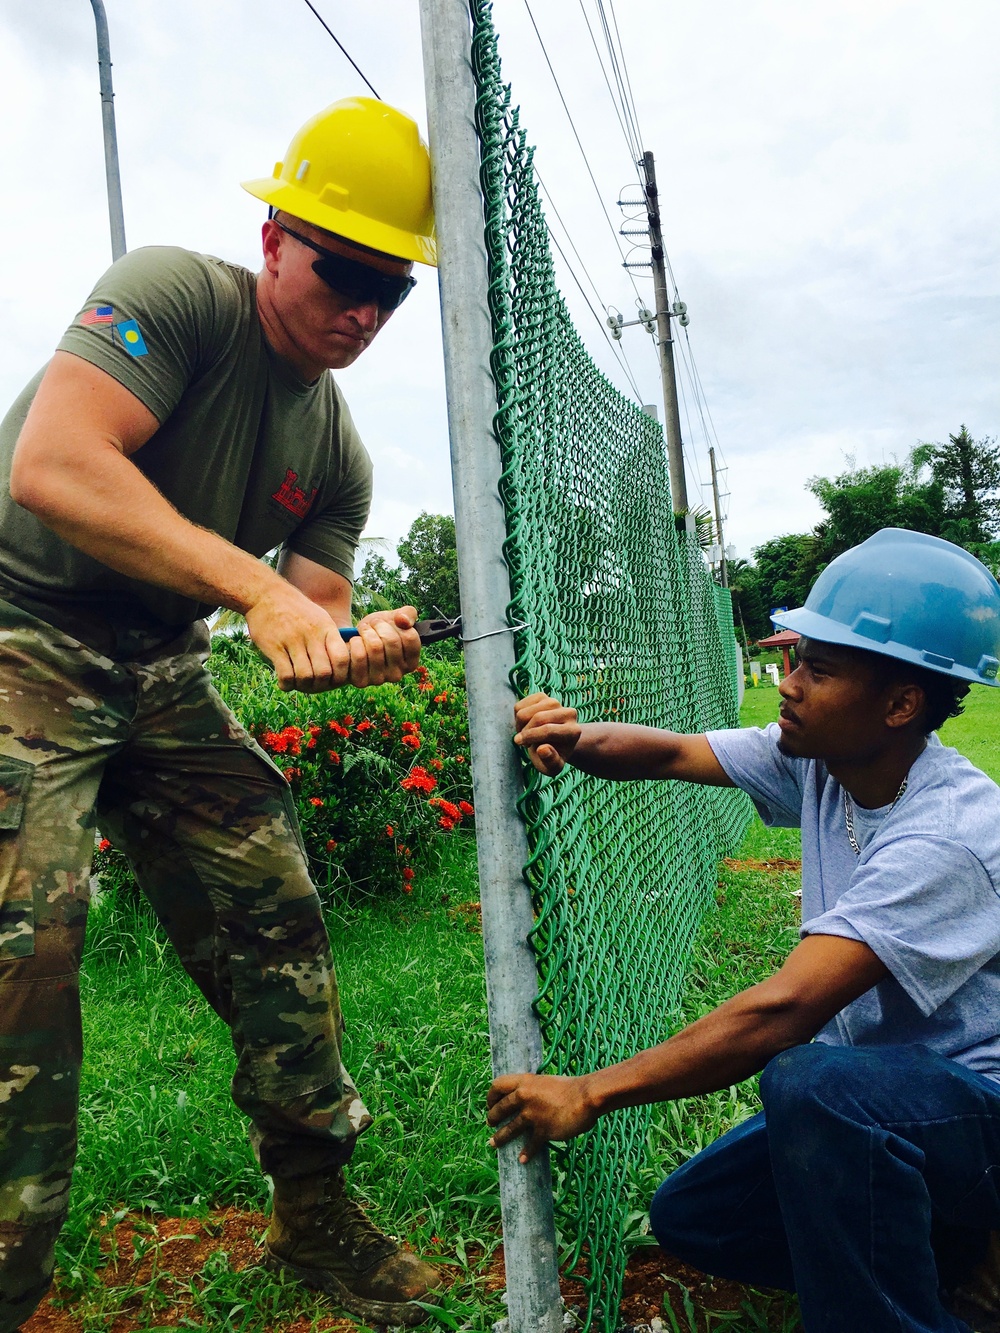 Soldiers Make Lasting Impact on Small Island in Pacific